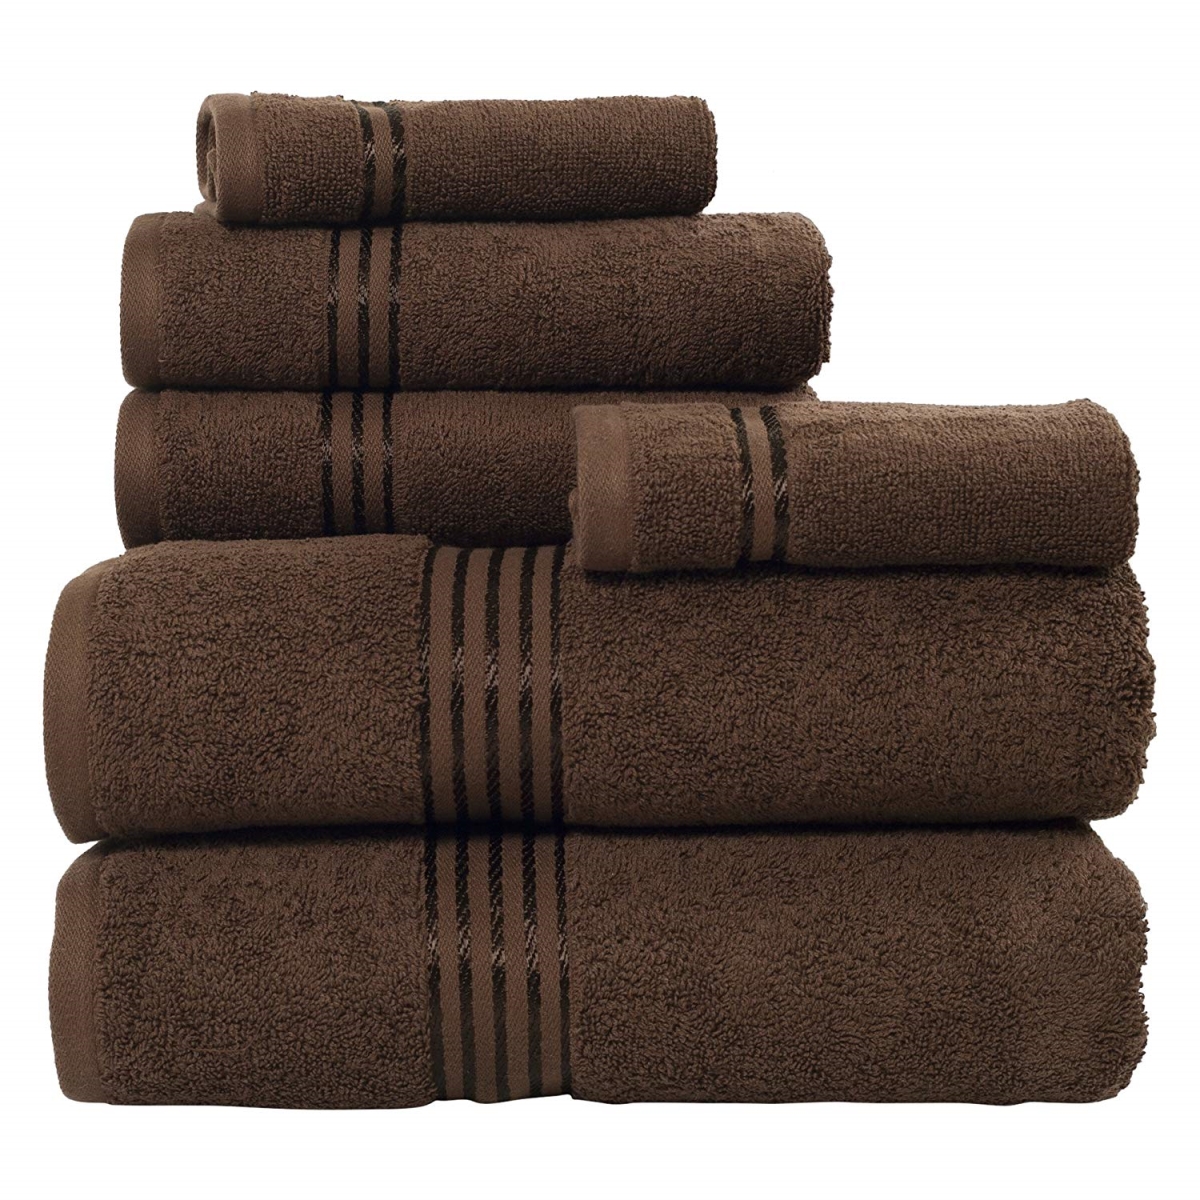 Picture of Bedford Home 67A-01813 100 Percent Cotton Hotel 6 Piece Towel Set - Chocolate